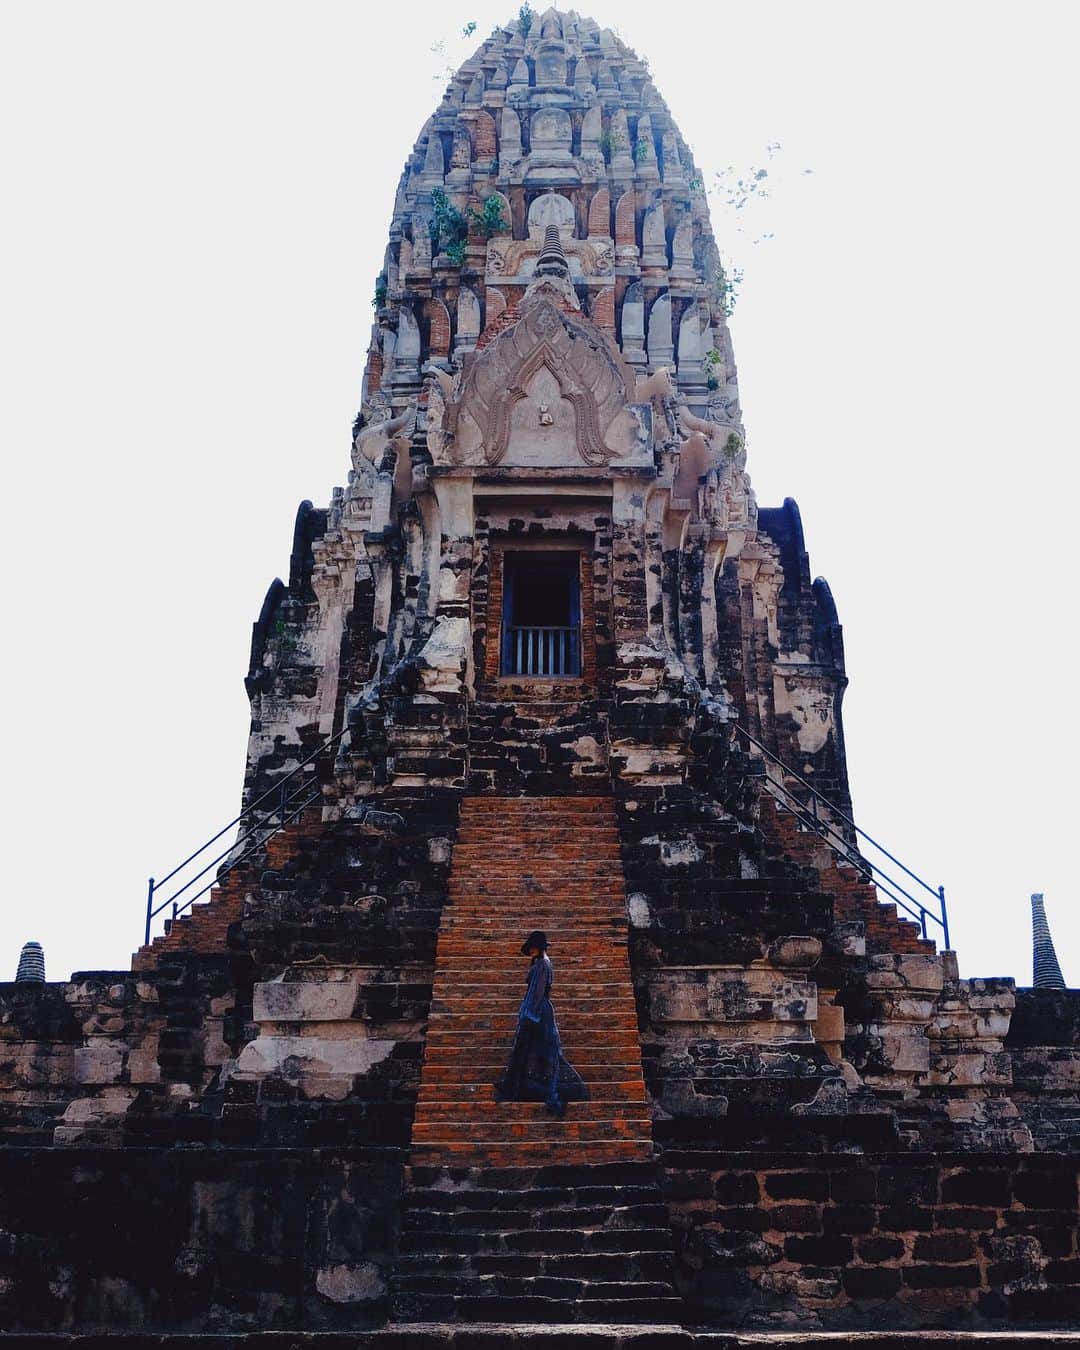 Amata Chittaseneeさんのインスタグラム写真 - (Amata ChittaseneeInstagram)「Thainess x the Ancient Ruins of Ayutthaya  โคตรไทย x พระนครศรีอยุธยา : ทททภาคกลาง #pearypieamazingThailand The ruins Escape the current capital of Thailand to visit the old one: Ayutthaya. The beautiful historical city is about 70 kilometers from Bangkok. The old capital of Thailand came to a brutal end when it was attacked, much of the city was devastated by fire. Most of the city was destroyed, and what is left of these relics and temples are still found in Ayutthaya today. The temples have their own Siamese style, but many of the temples’ construction drew upon inspiration from other influences, including Sri Lanka. These ruins were discovered in 1991, and they were designated a UNESCO World Heritage Site!! 🤩  #ayutthaya #Thailand  อาณาจักรอยุธยา กรุงศรีอยุธยามีชื่อเดิมที่ปรากฏในเอกสารชั้นต้นที่เป็นศิลาจารึกและตำนานบางเรื่องว่า "กรุงอโยธยา"และเป็นเมืองหลวงของสยามกว่า 400 ปี ซึ่งปัจจุบัน ยังหลงเหลือโบราณสถานที่น่าสนใจปละสวยงามมากๆ 🖤 ได้รับการขึ้นทะเบียนมรดกโลกทางวัฒนธรรม」5月26日 11時20分 - pearypie